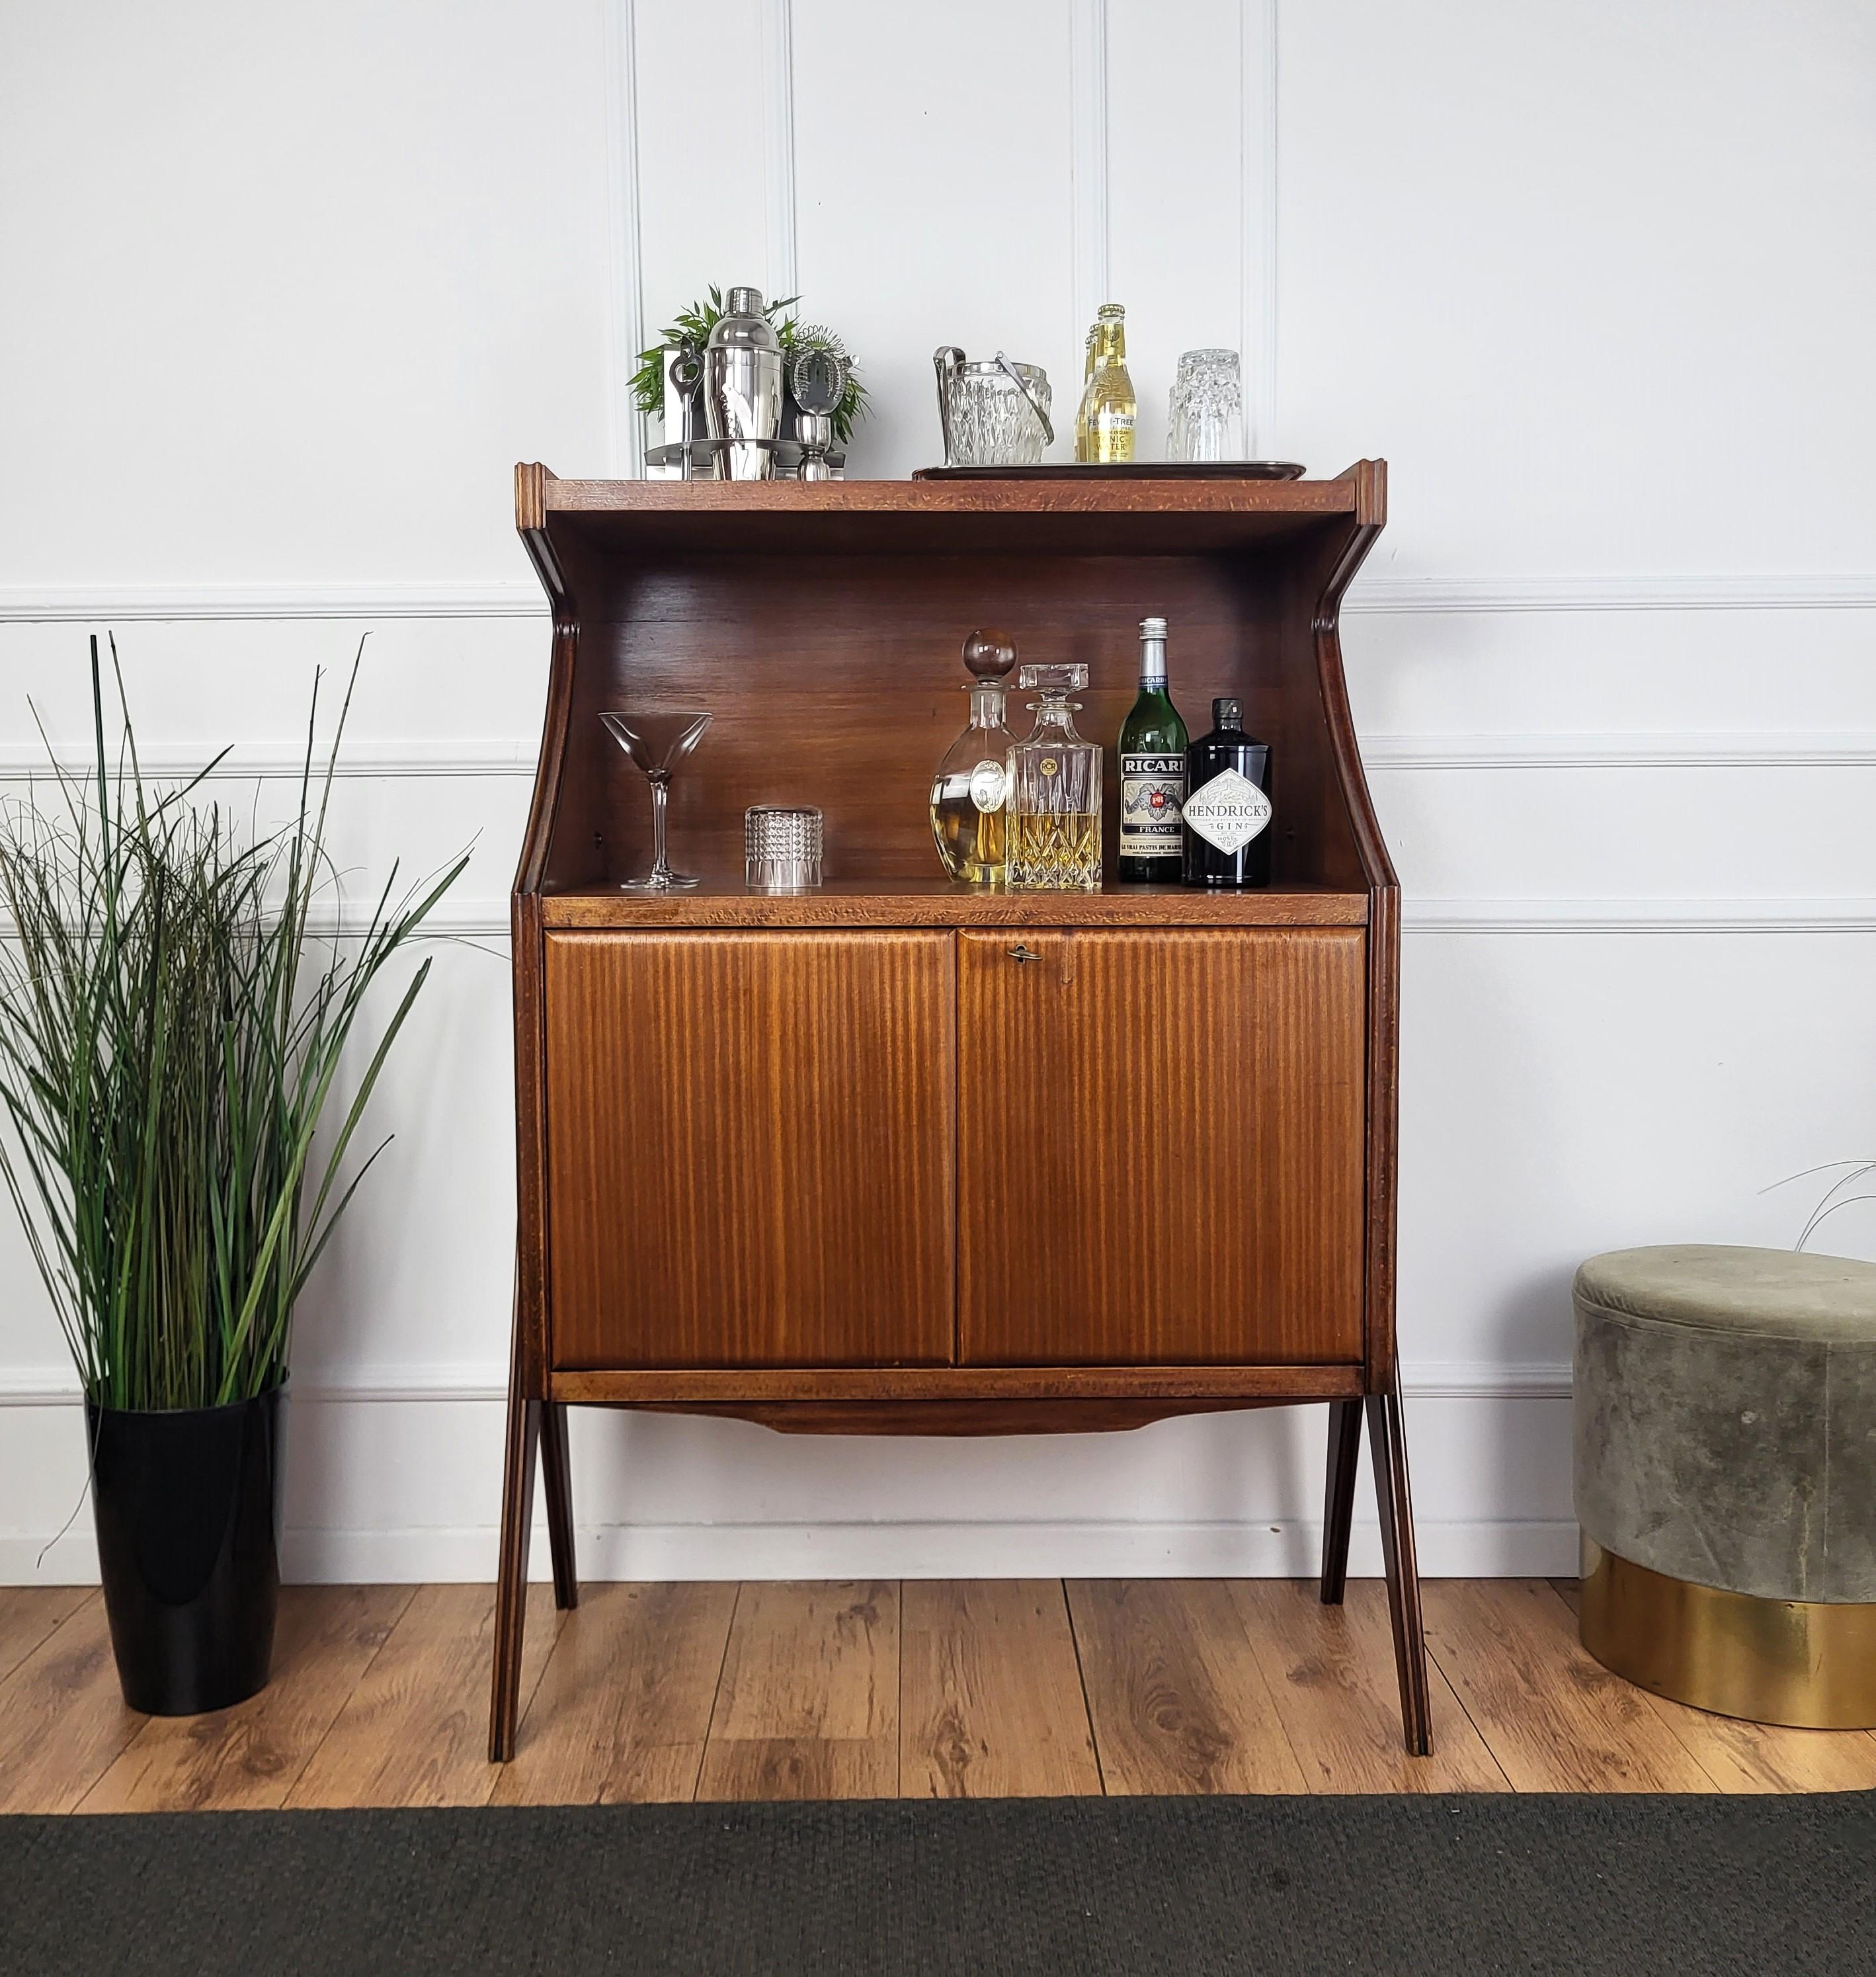 Very elegant Italian Art Deco Mid-Century Modern dry bar cocktail cabinet, in beautiful walnut veneer wood with central shelves and bottom door with internal storage and antique brass keylock, standing on two pairs of typical Italian Mid-Century